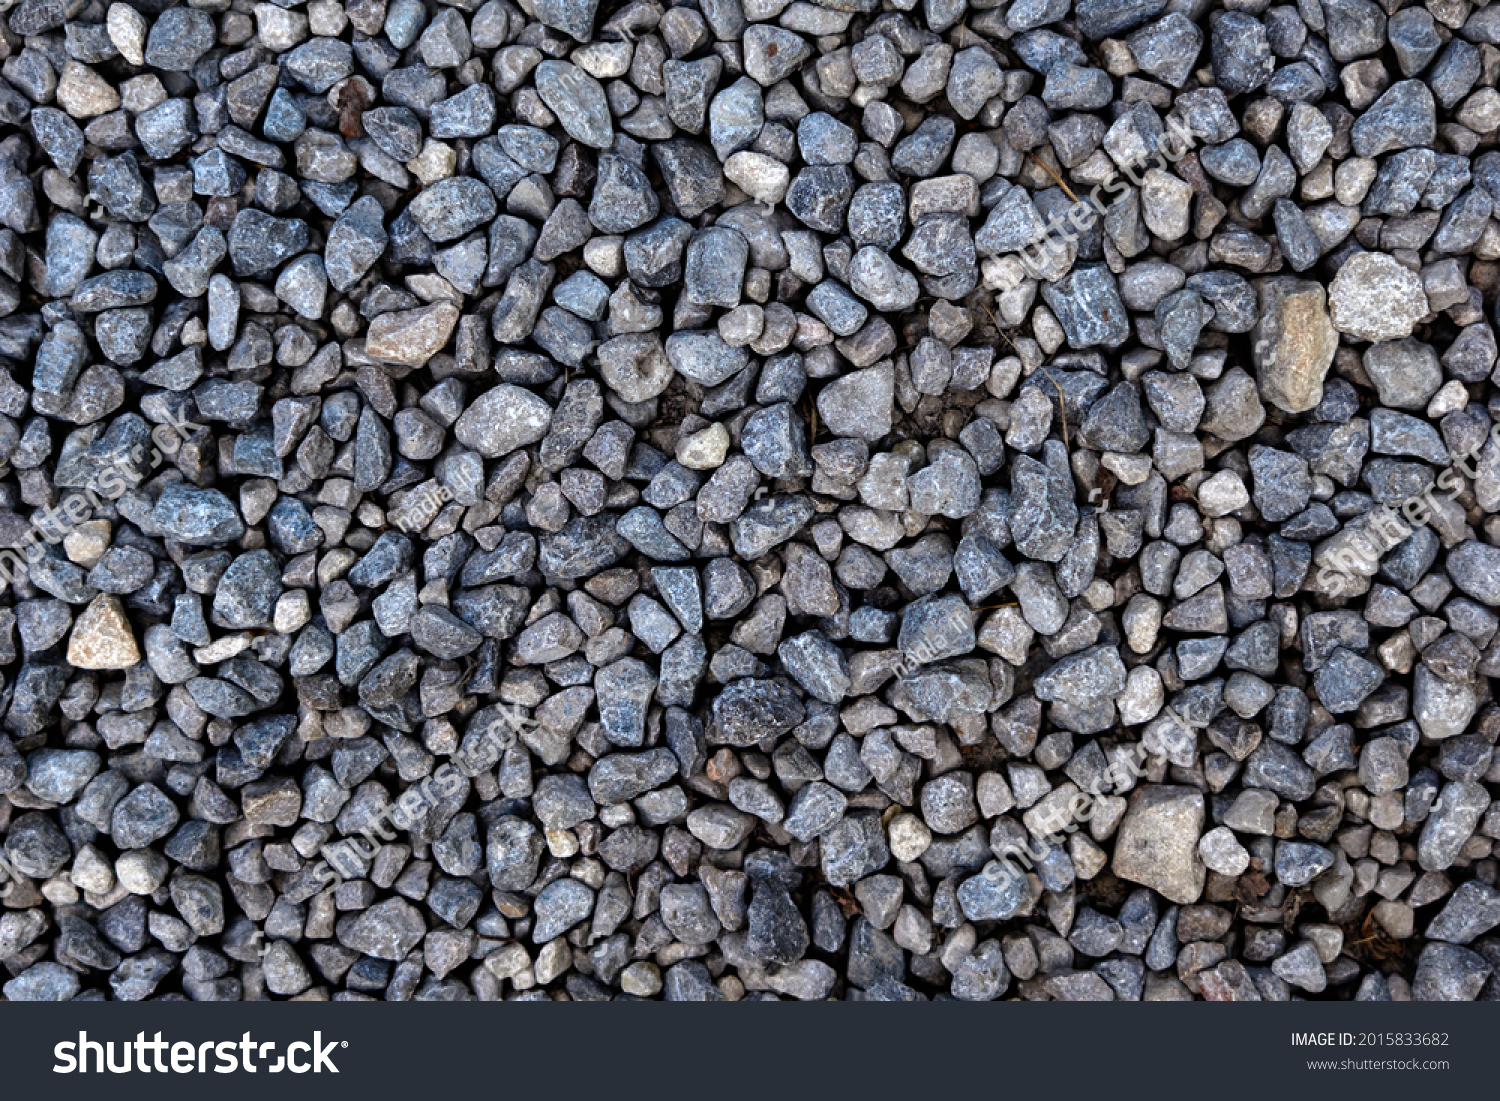 Smooth round pebbles texture background. Pebble sea beach close-up, dark wet pebble and gray dry pebble. High quality photo #2015833682